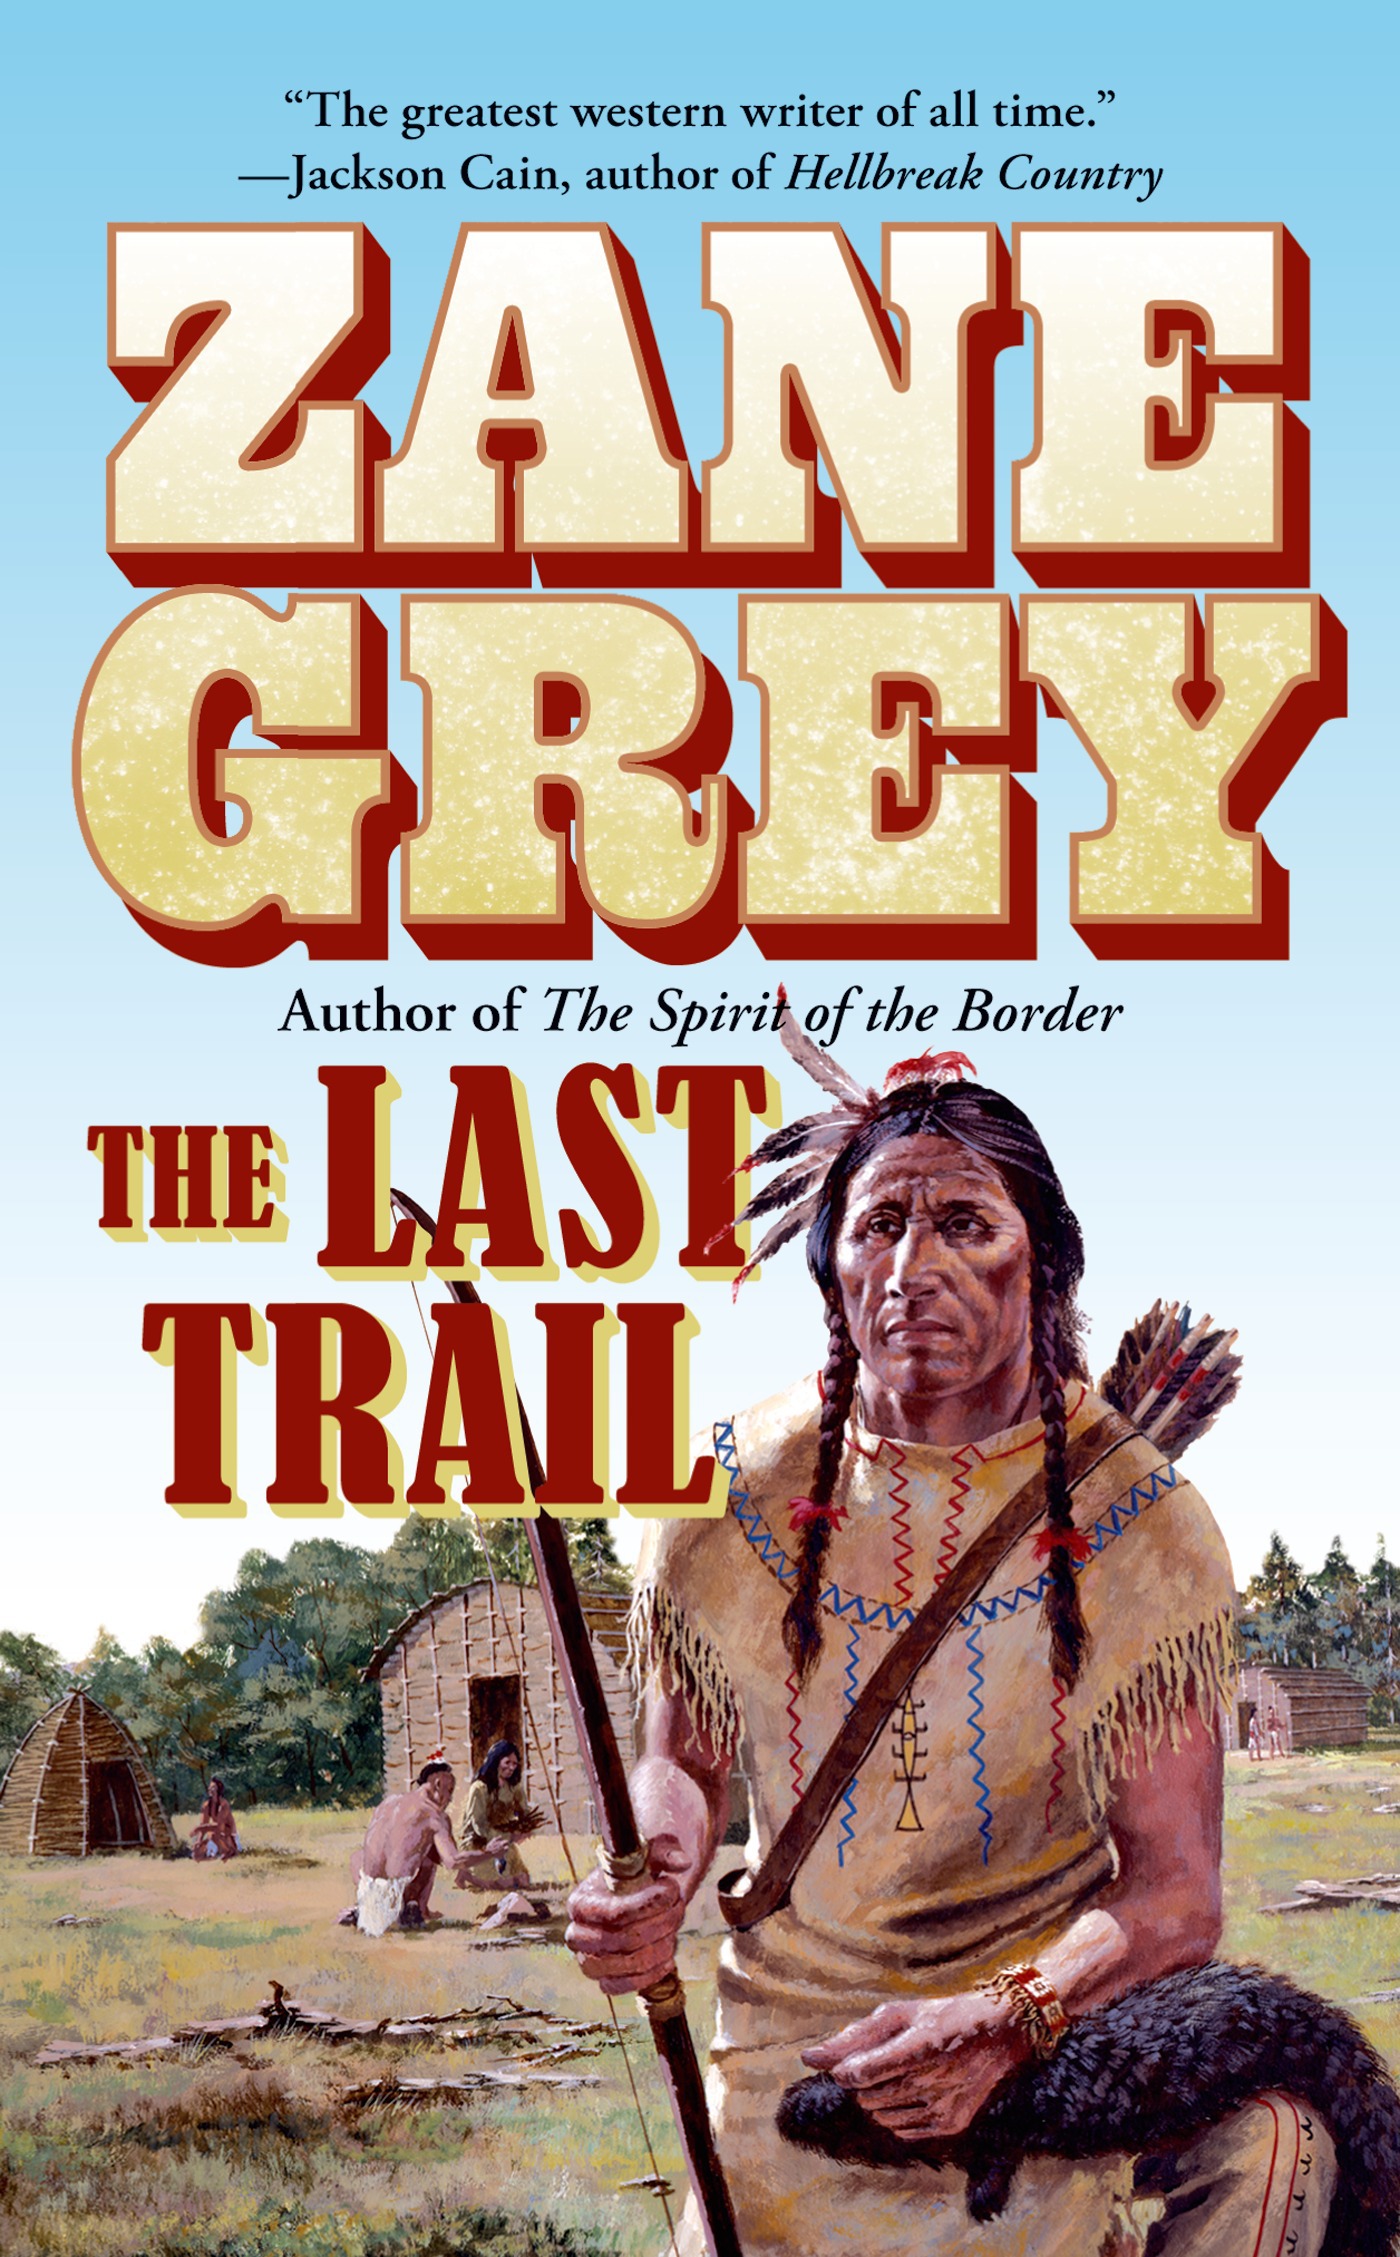 The Last Trail : Stories of the Ohio Frontier by Zane Grey